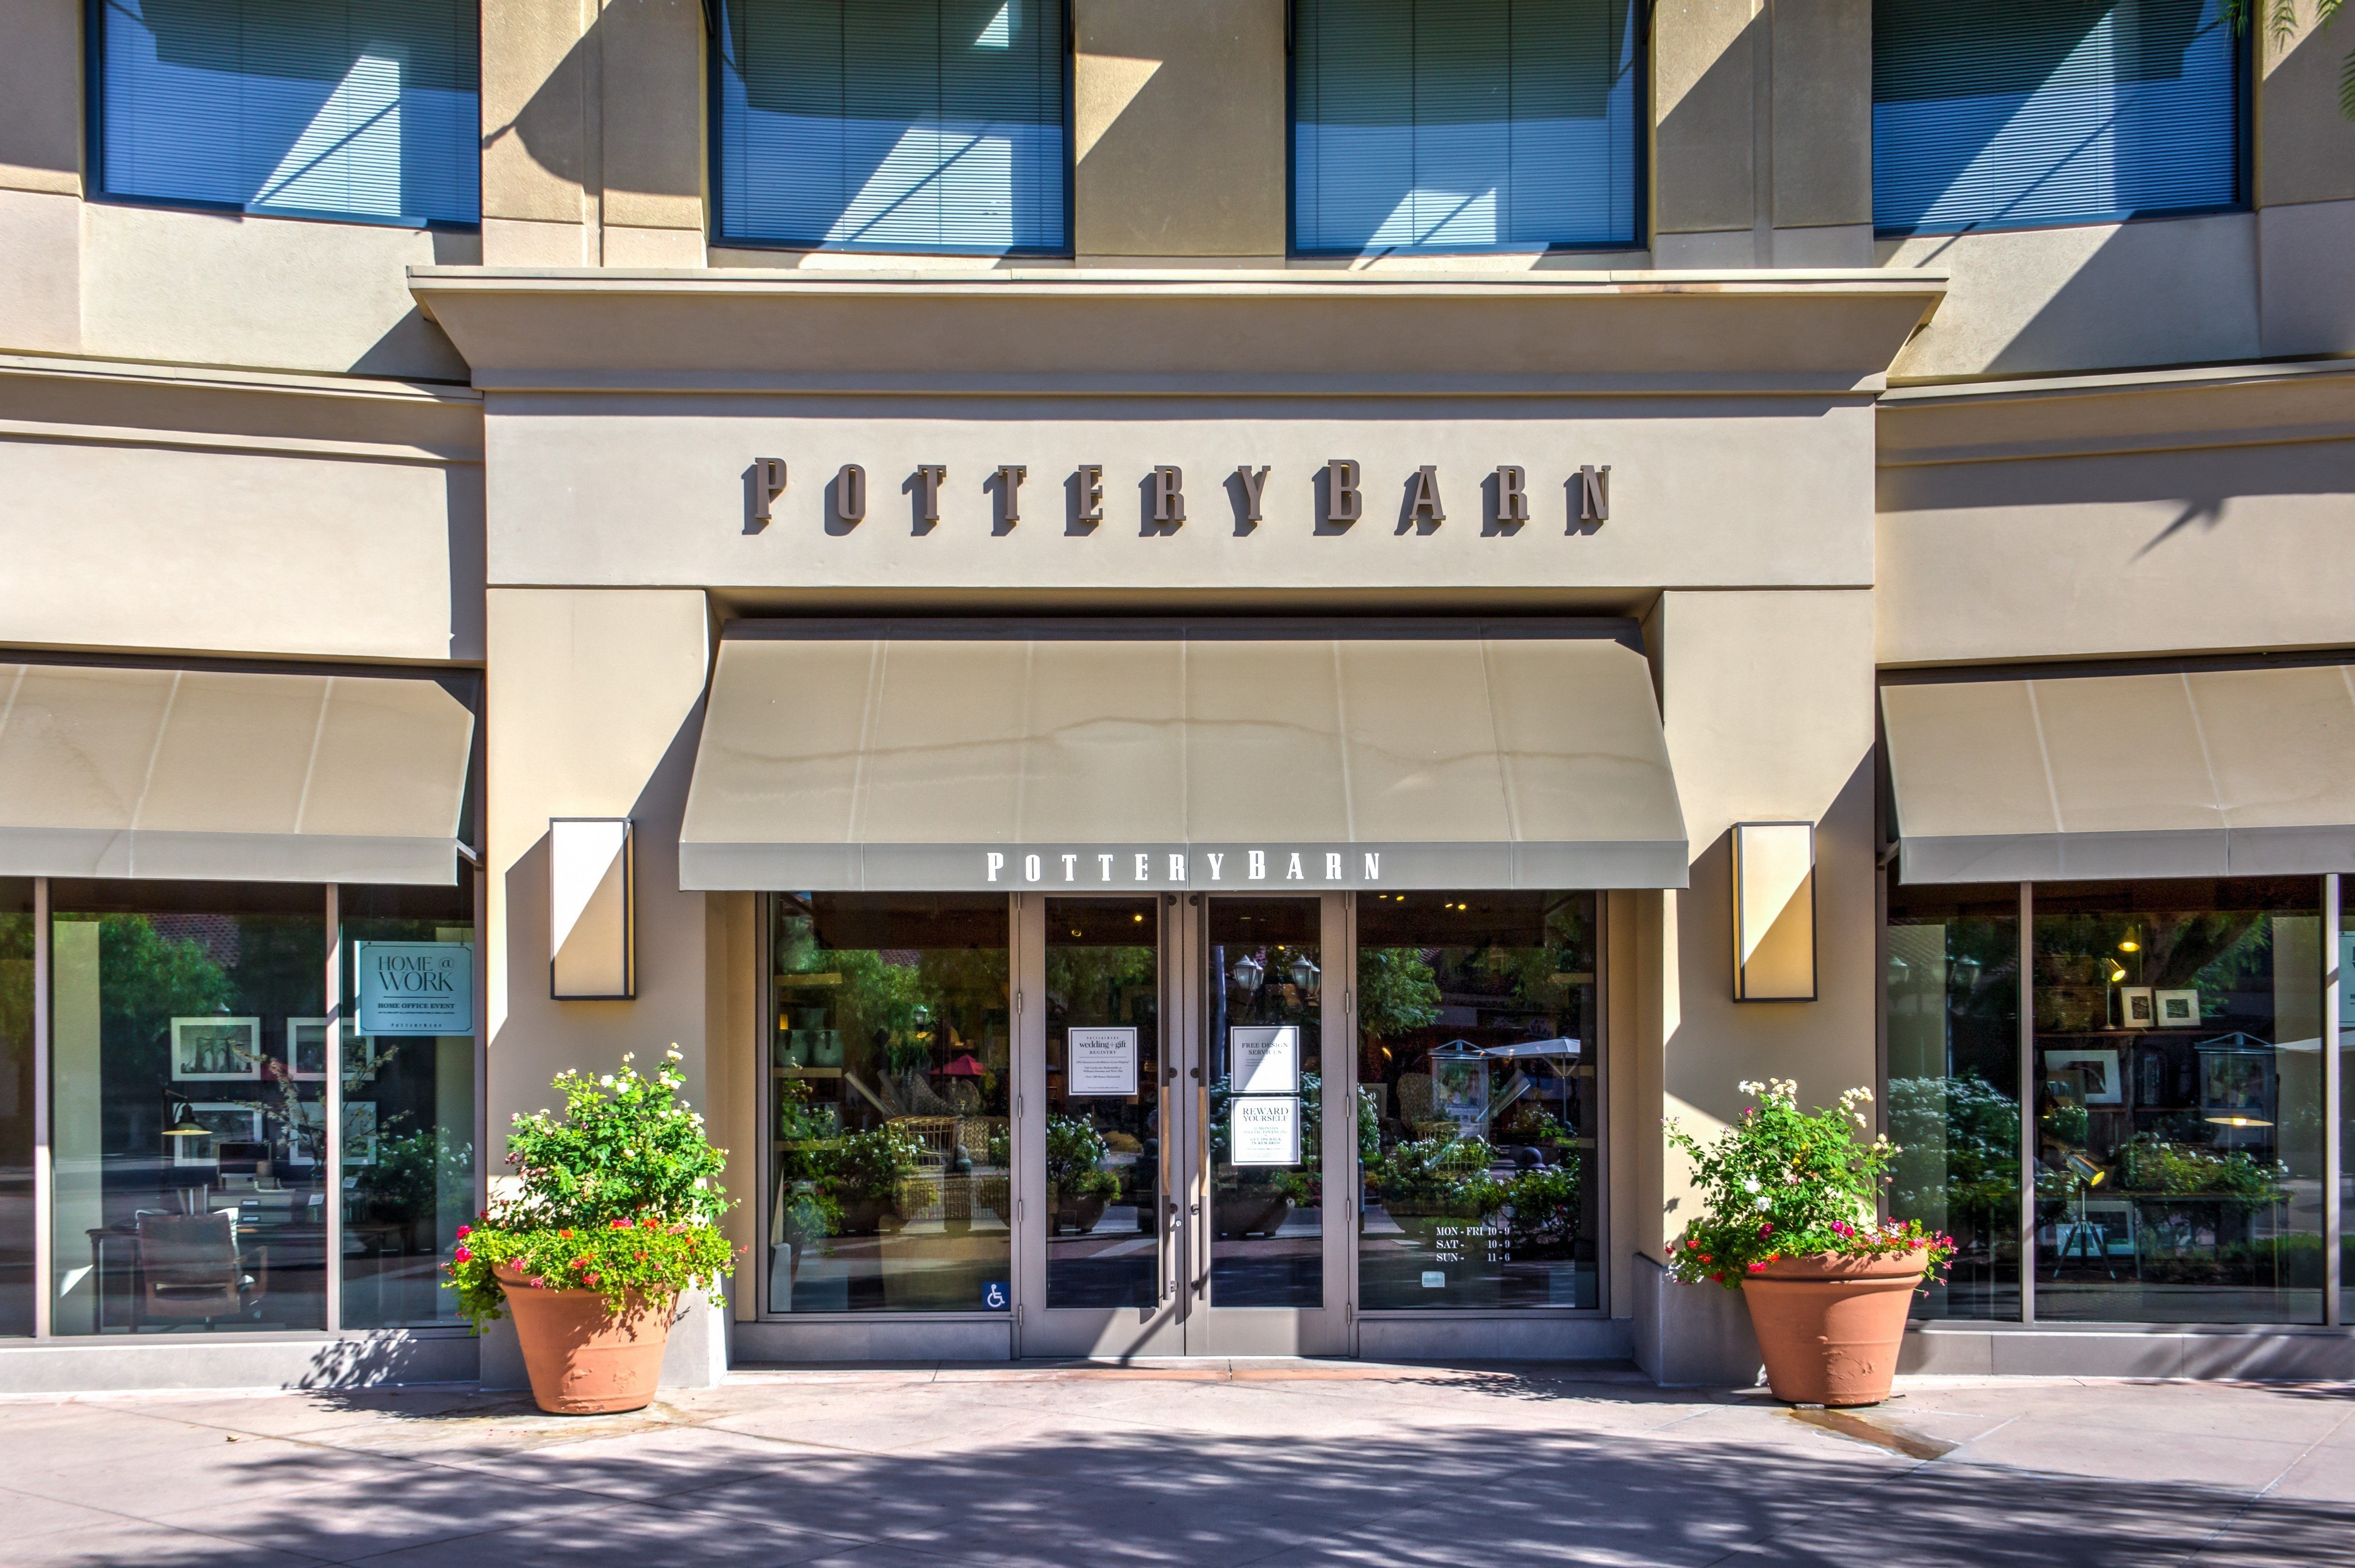 pottery barn store front